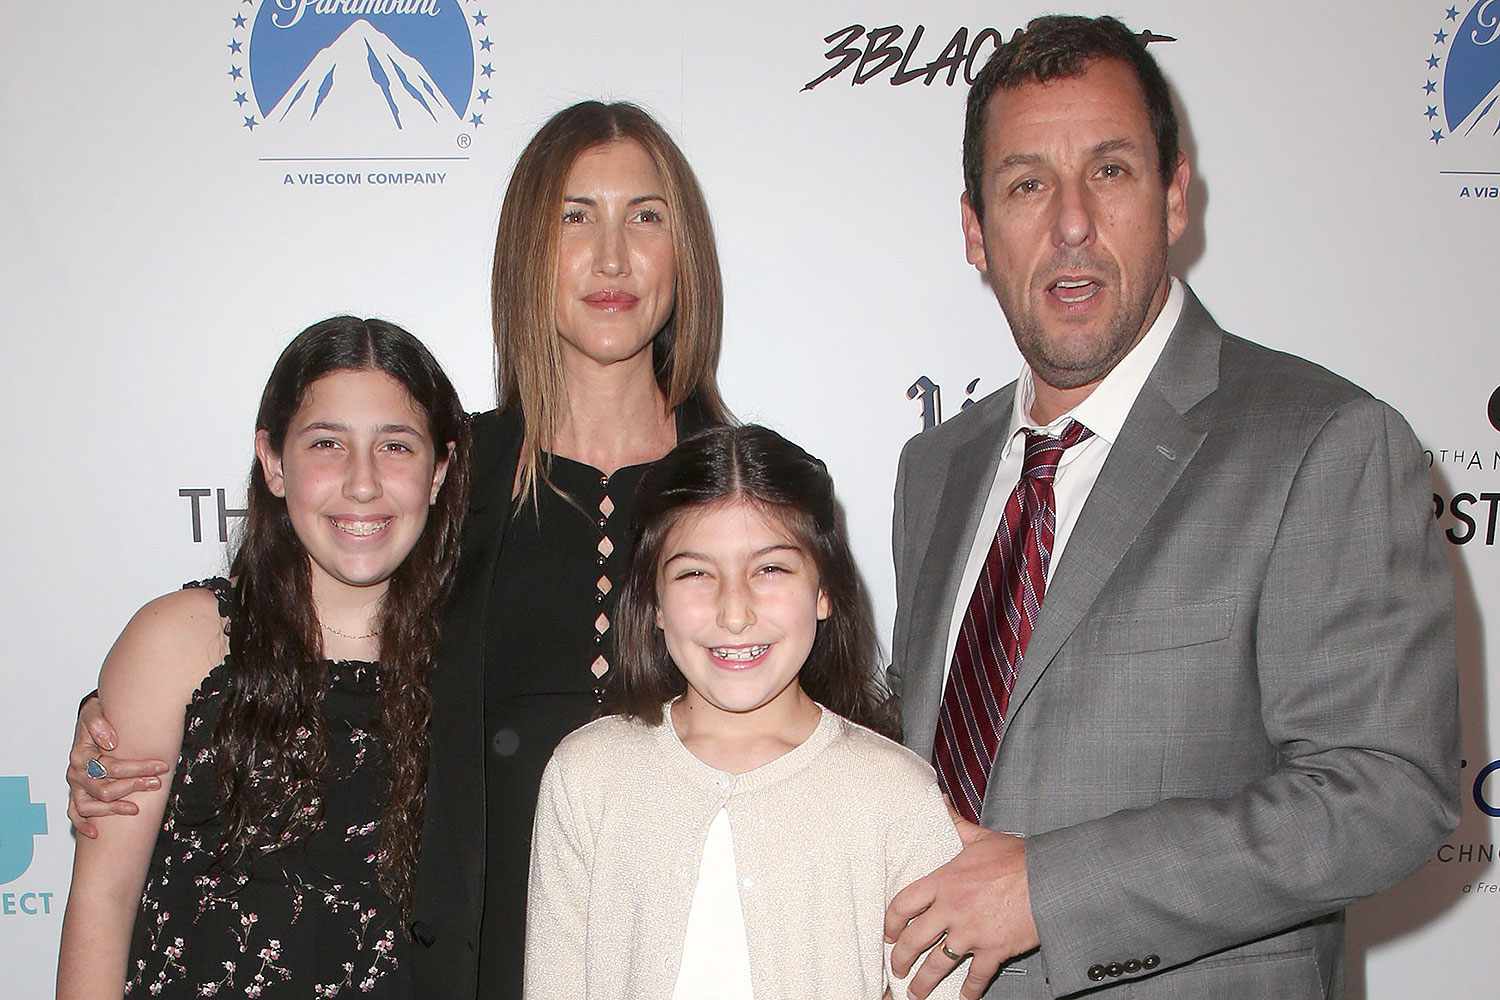 Adam Sandler Net Worth, Lifestyle, Biography, Wiki, Family And More